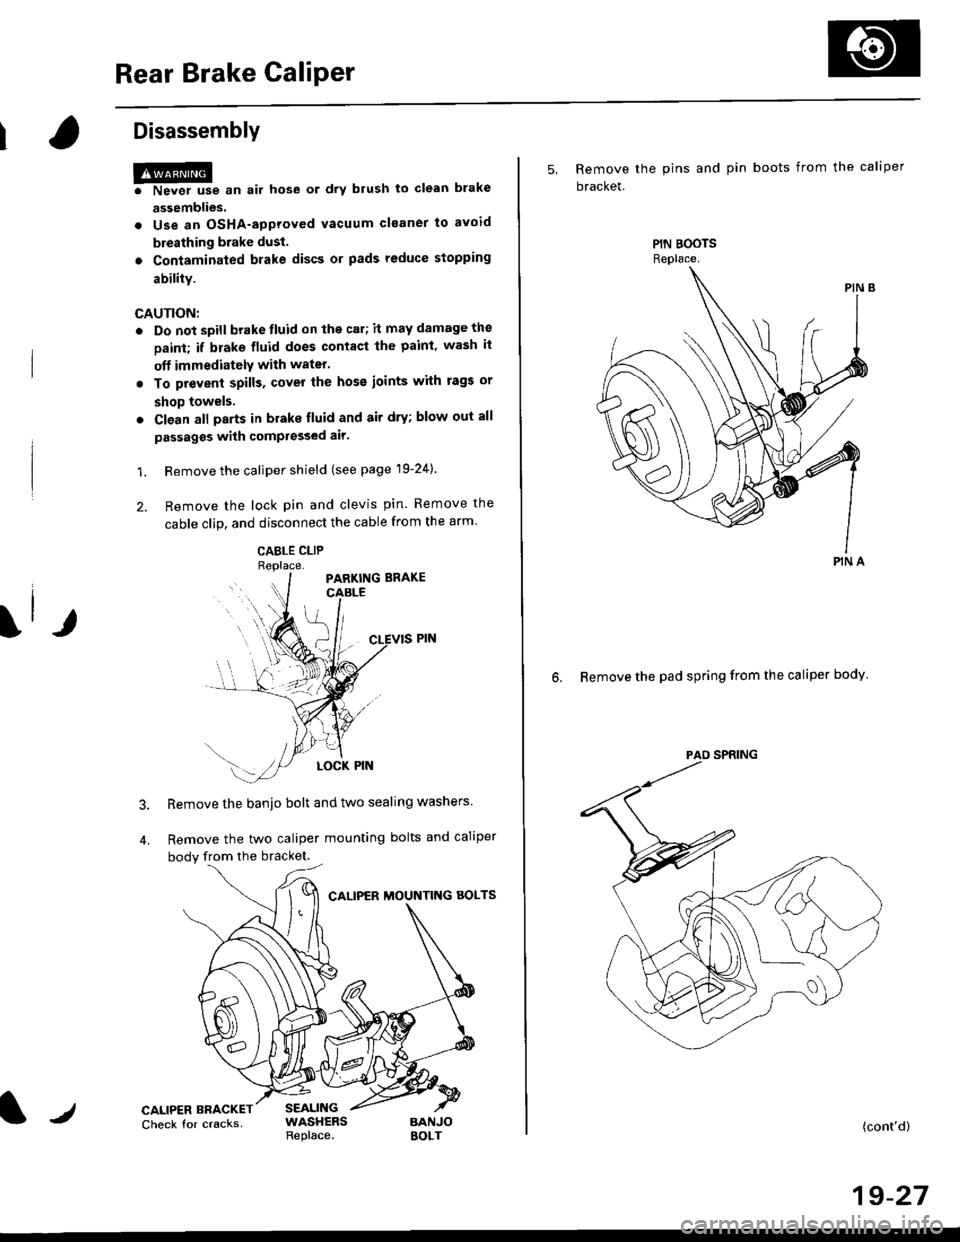 HONDA CIVIC 1997 6.G User Guide Rear Brake Caliper
Disassembly
@f l,lever use an air hose or dry brush to clean
assemblies.
. Use an OsHA-approved vacuum cleaner to
brake
avoid
breathing brake dust.
. Contaminated brake discs or pa